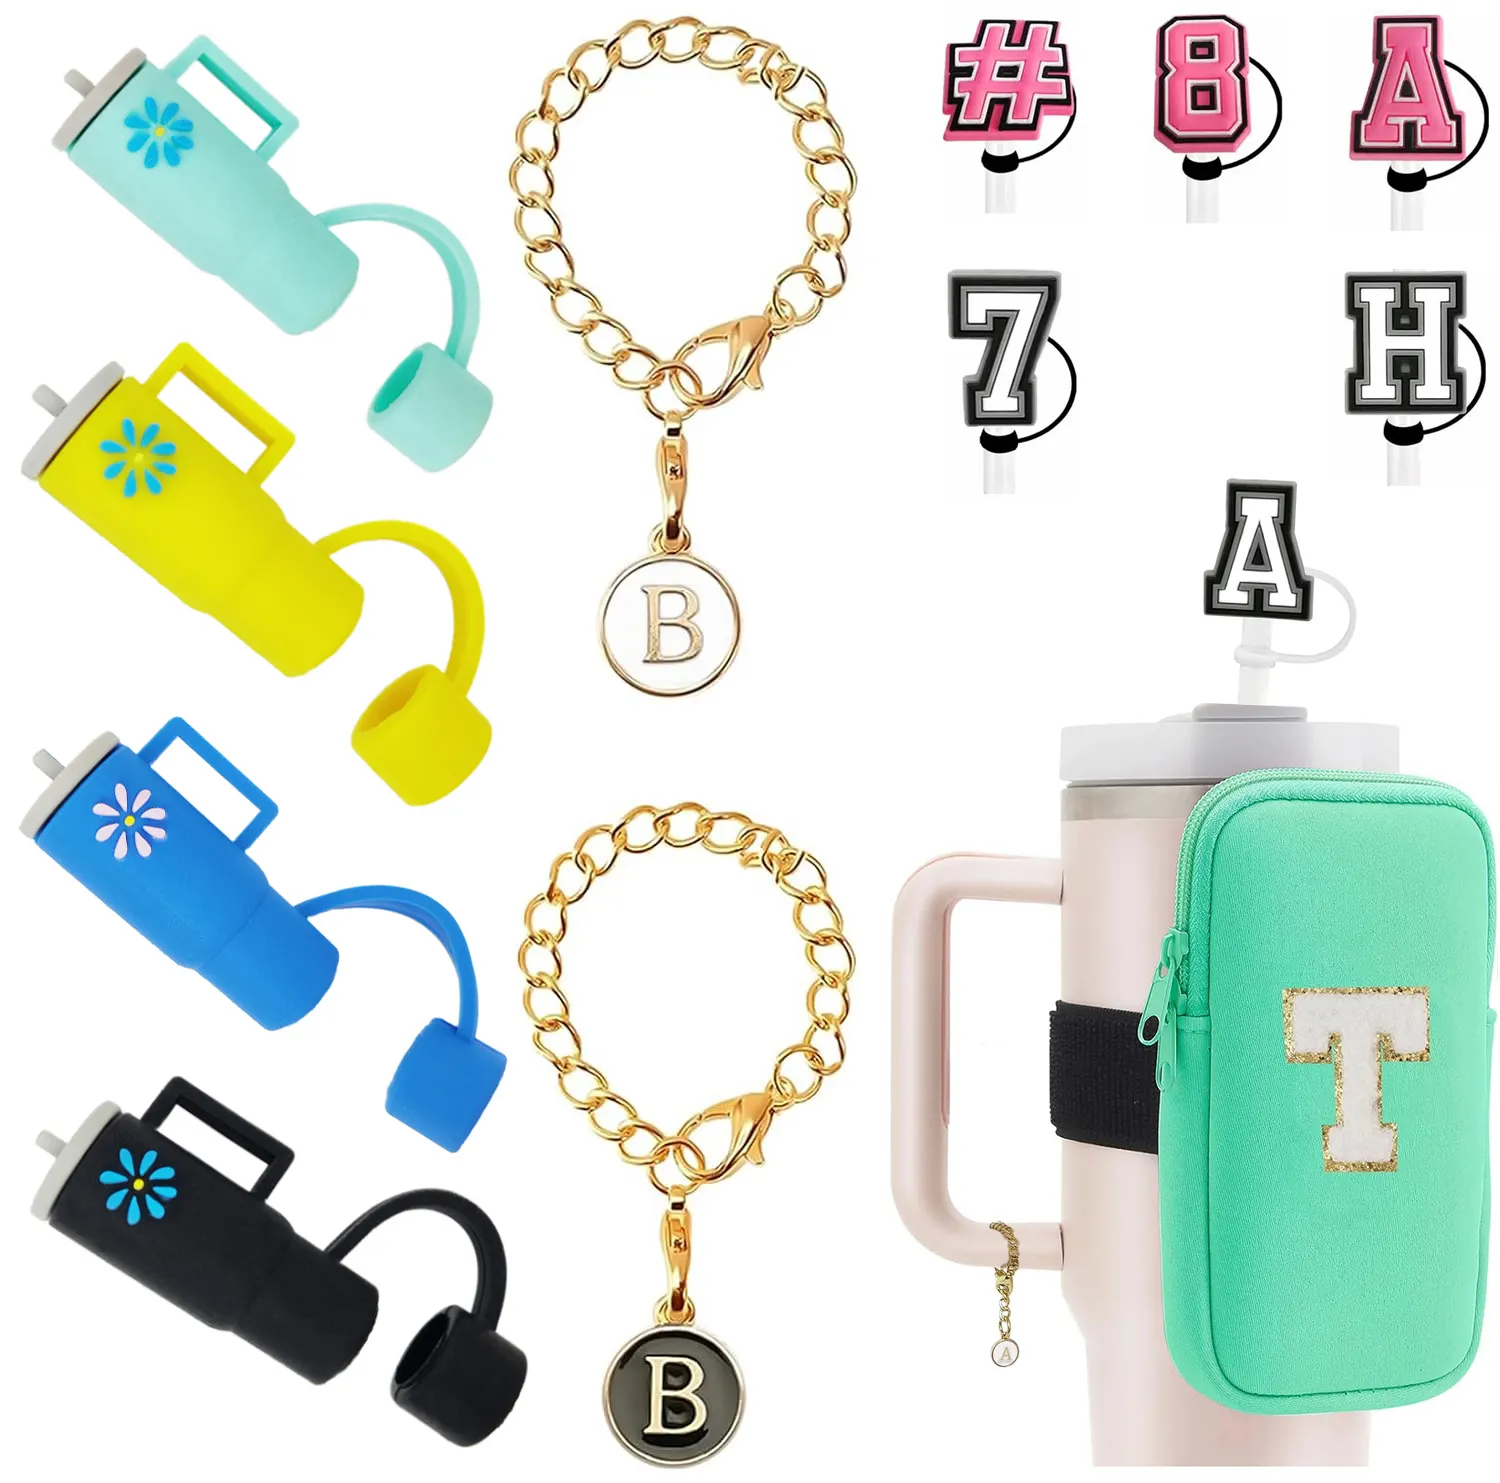 DD2350 Personalized Cup Accessories Letter Charms Name ID Initial Letter Number Tumbler Straw Cover & Pouch for Cup